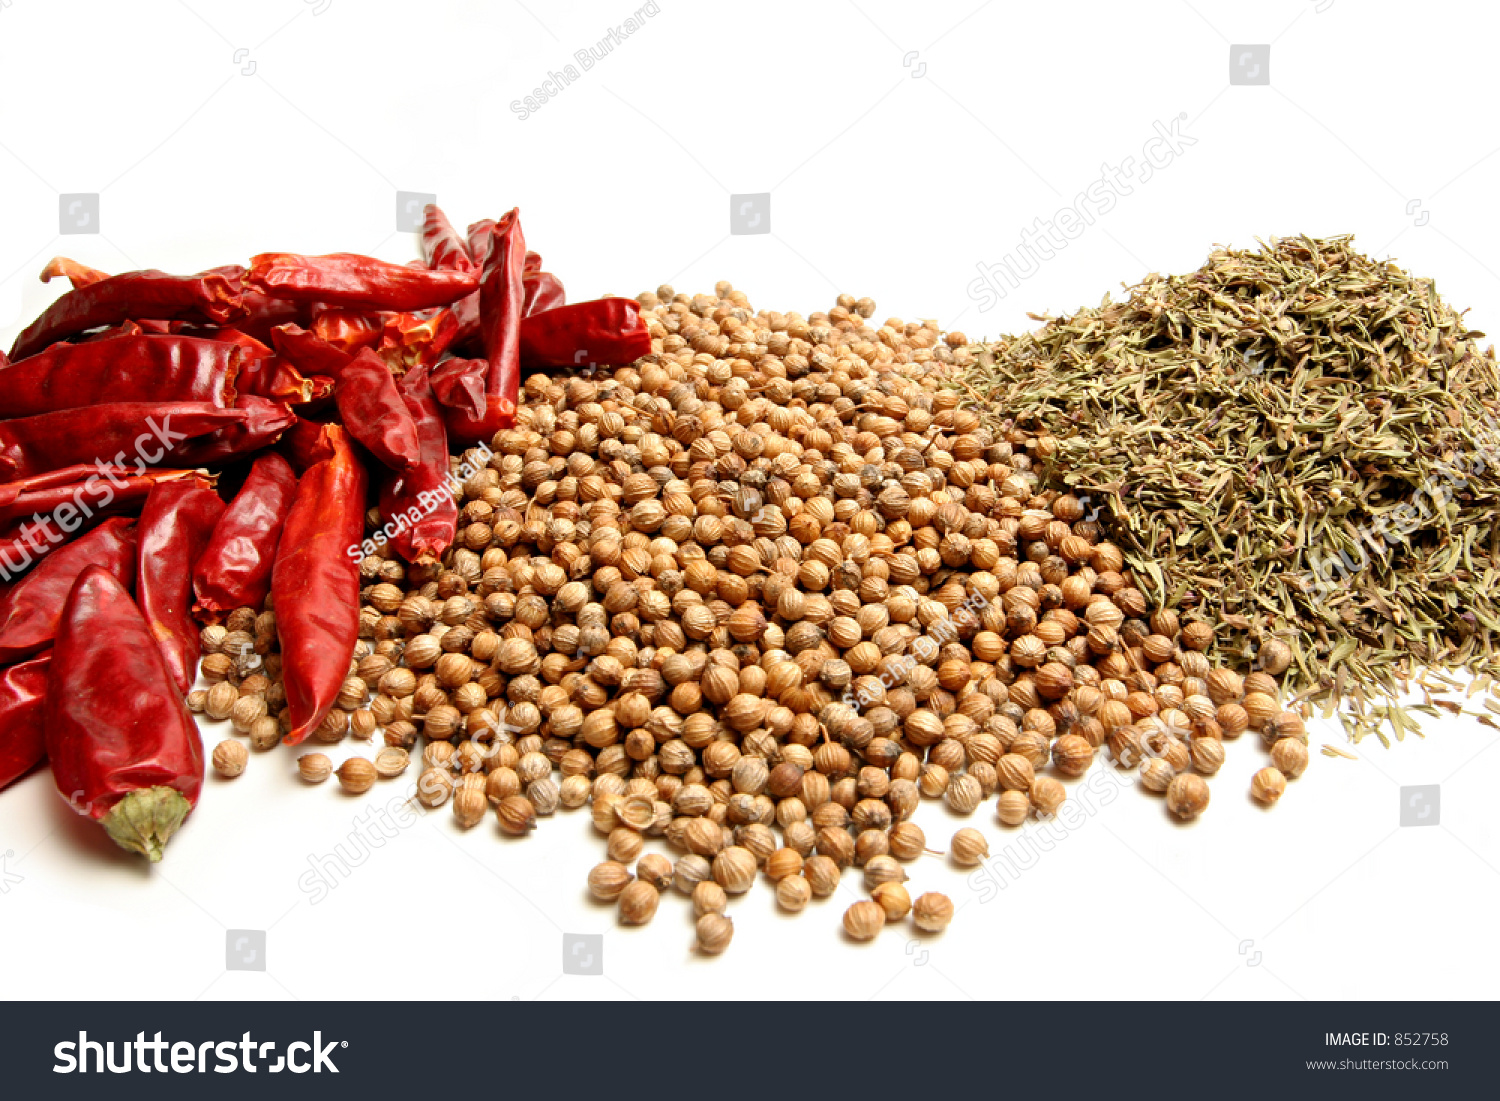 Herbs And Spices - D